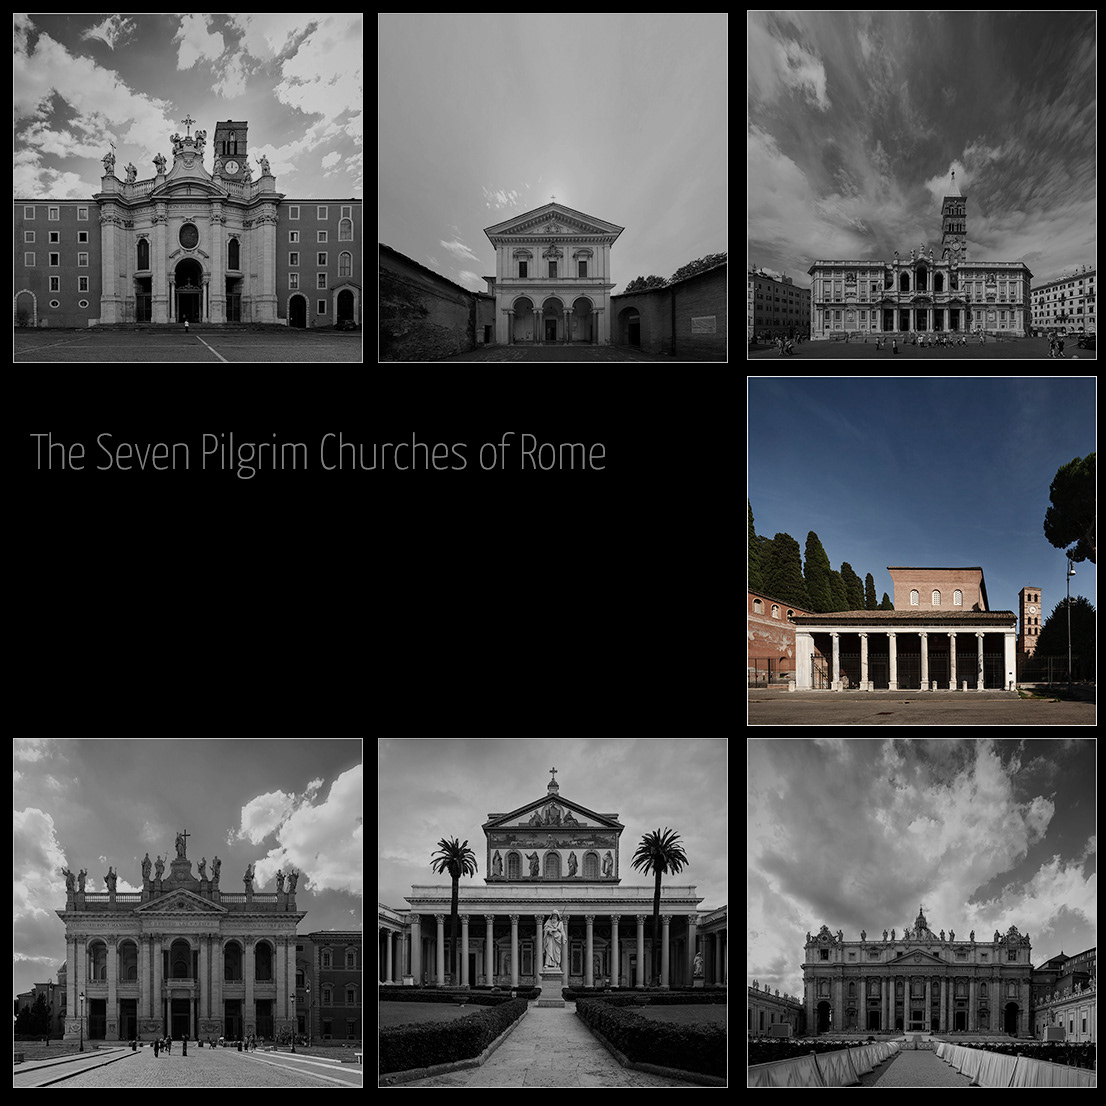 Roman churches Catholicism mosaic pictures Rome Italy panoramic images Architecture Photography Vatican goods arts